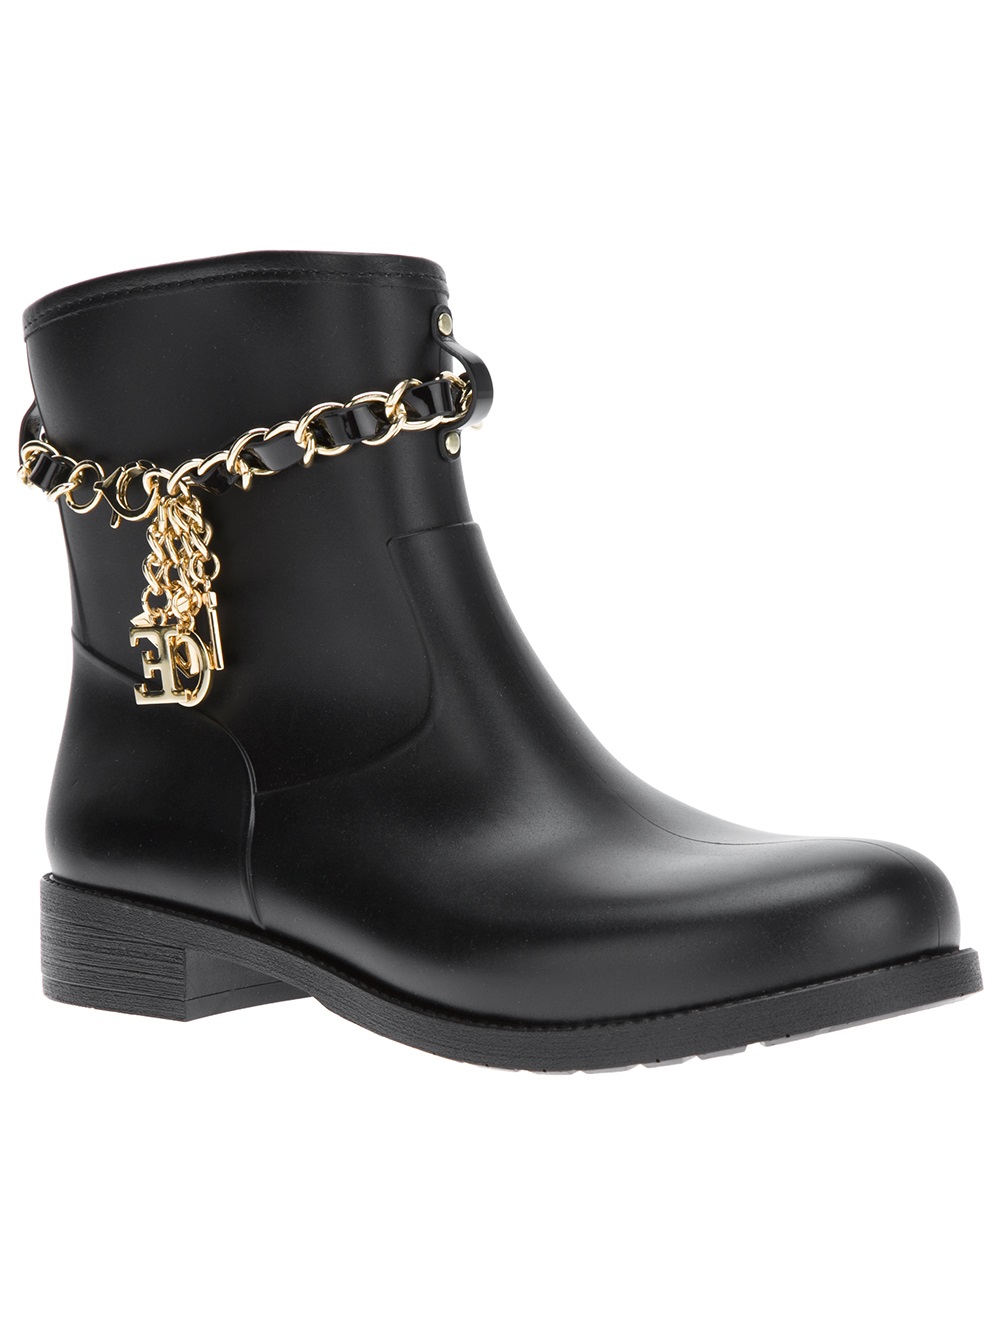 Love Moschino Chain Detail Ankle Boot in Black | Lyst